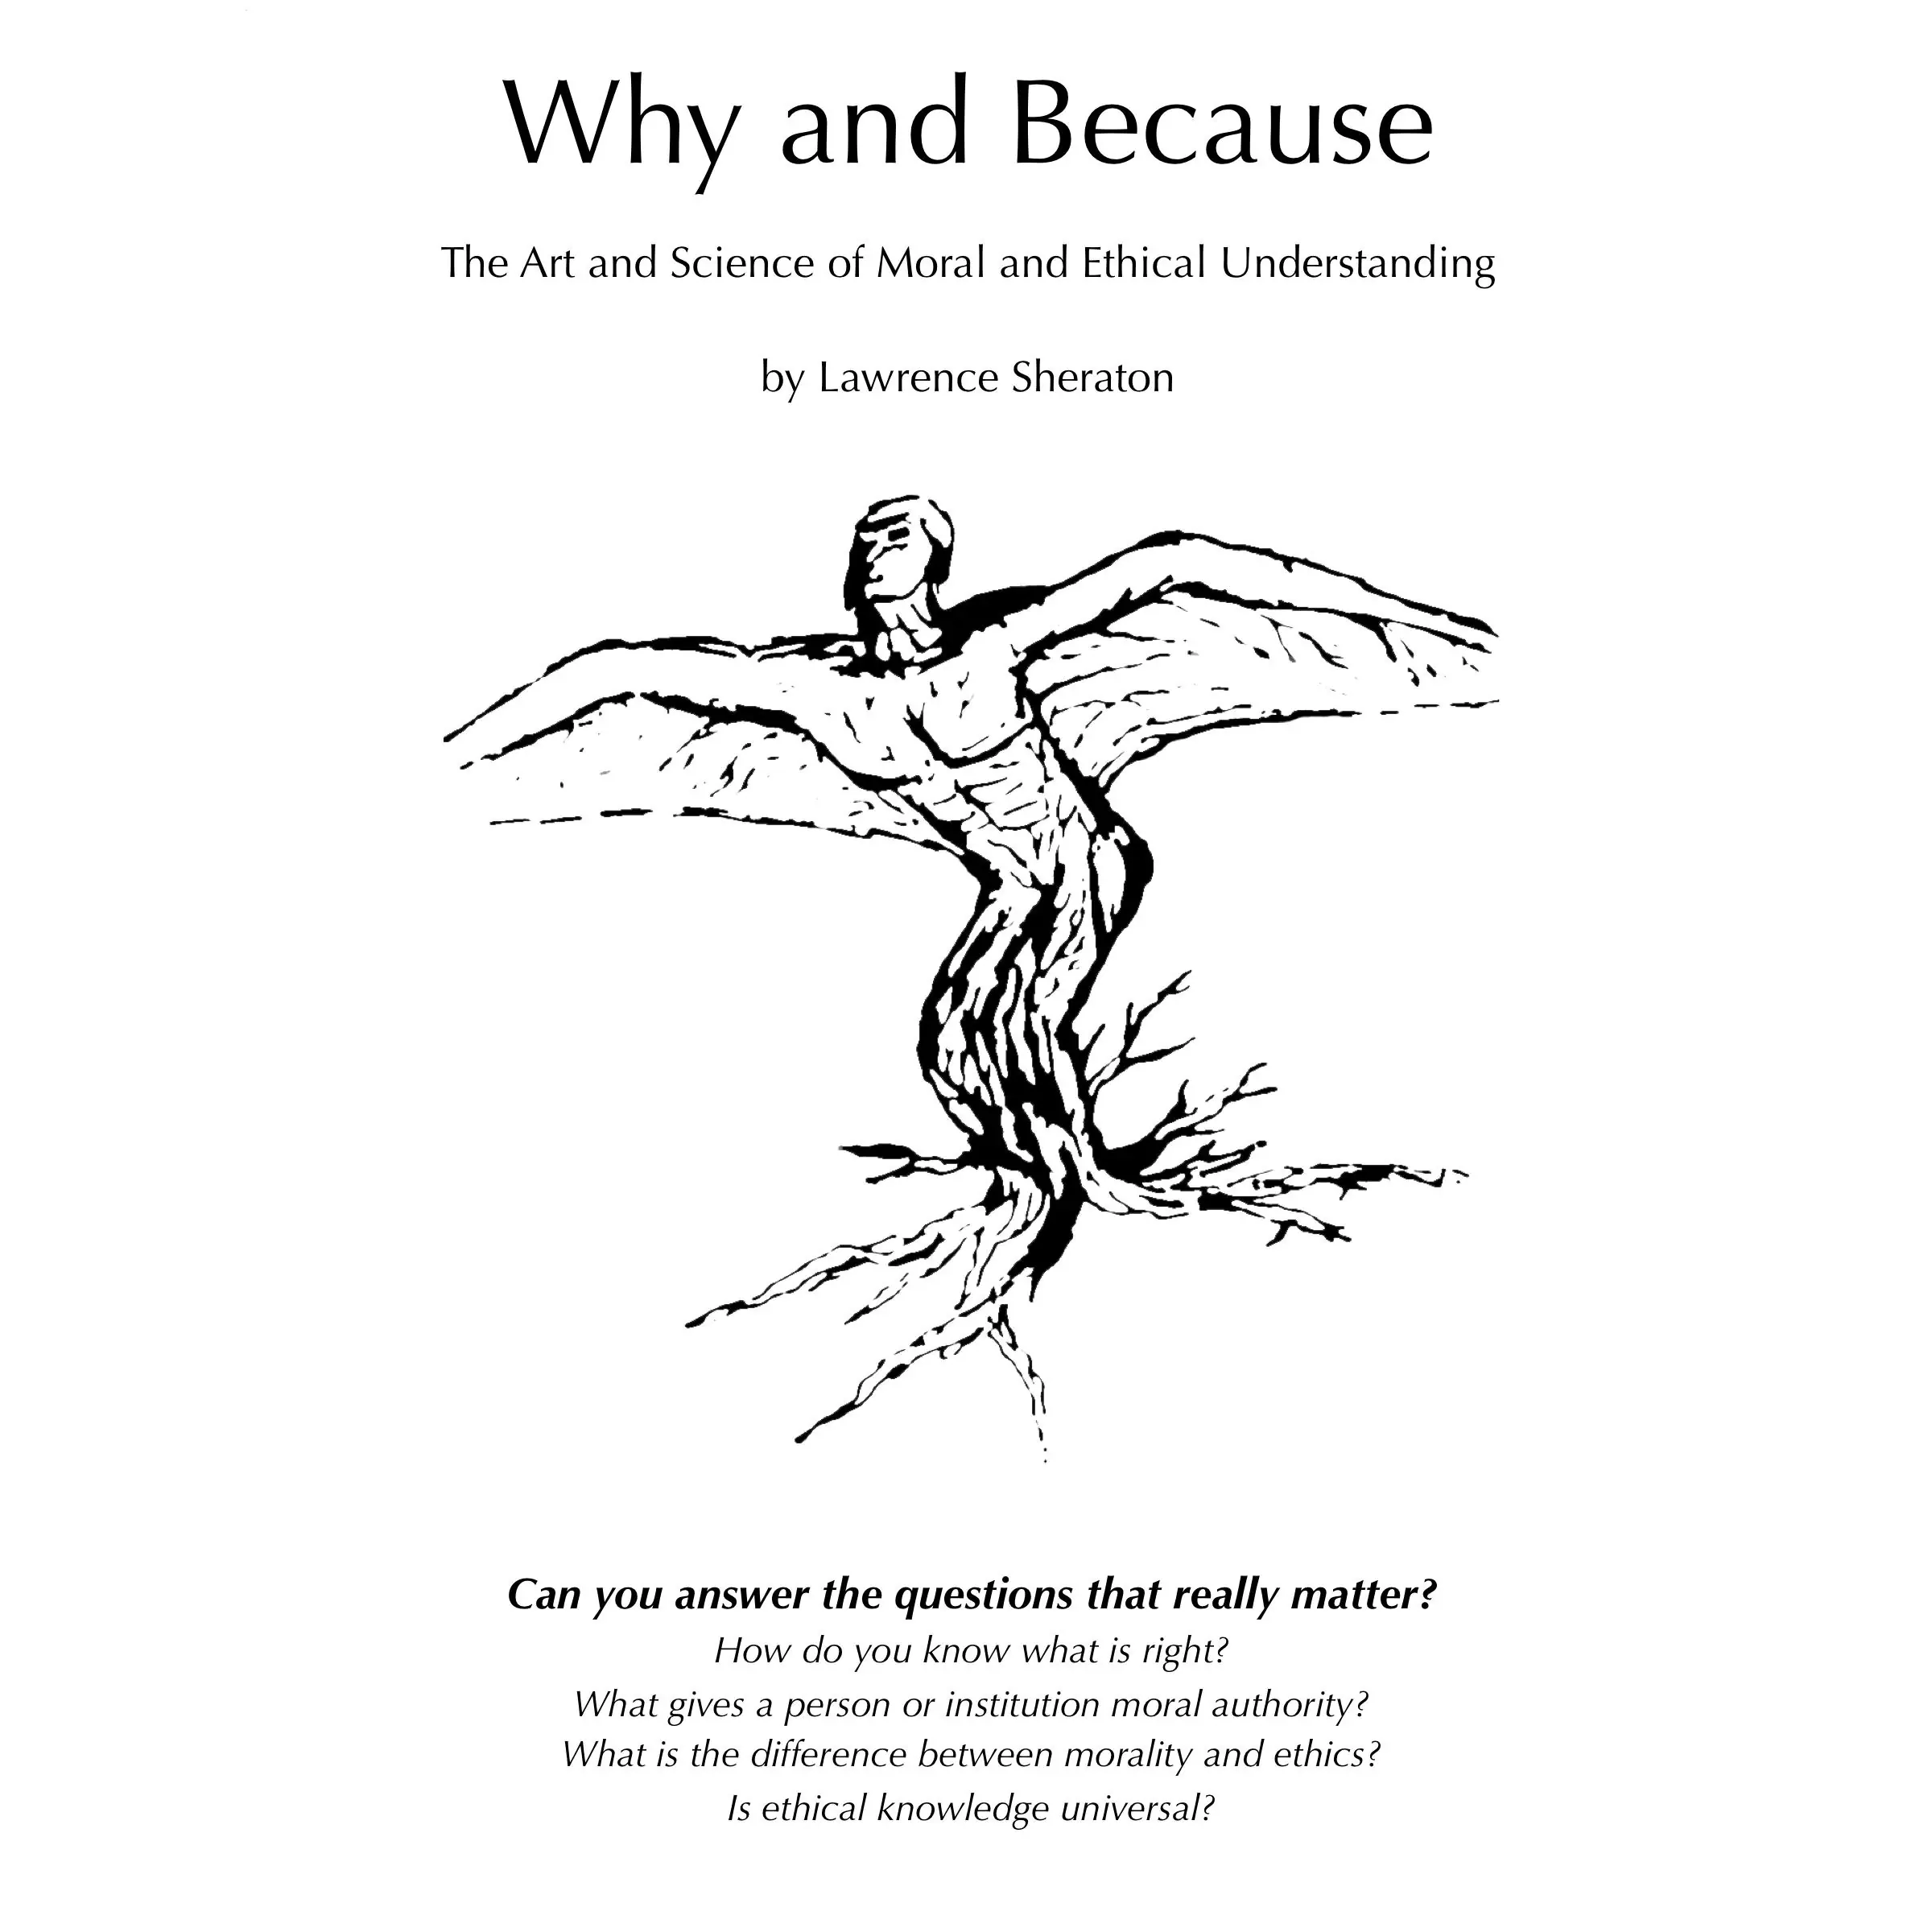 Why and Because - The Art and Science of Moral and Ethical Understanding Audiobook by Lawrence Sheraton